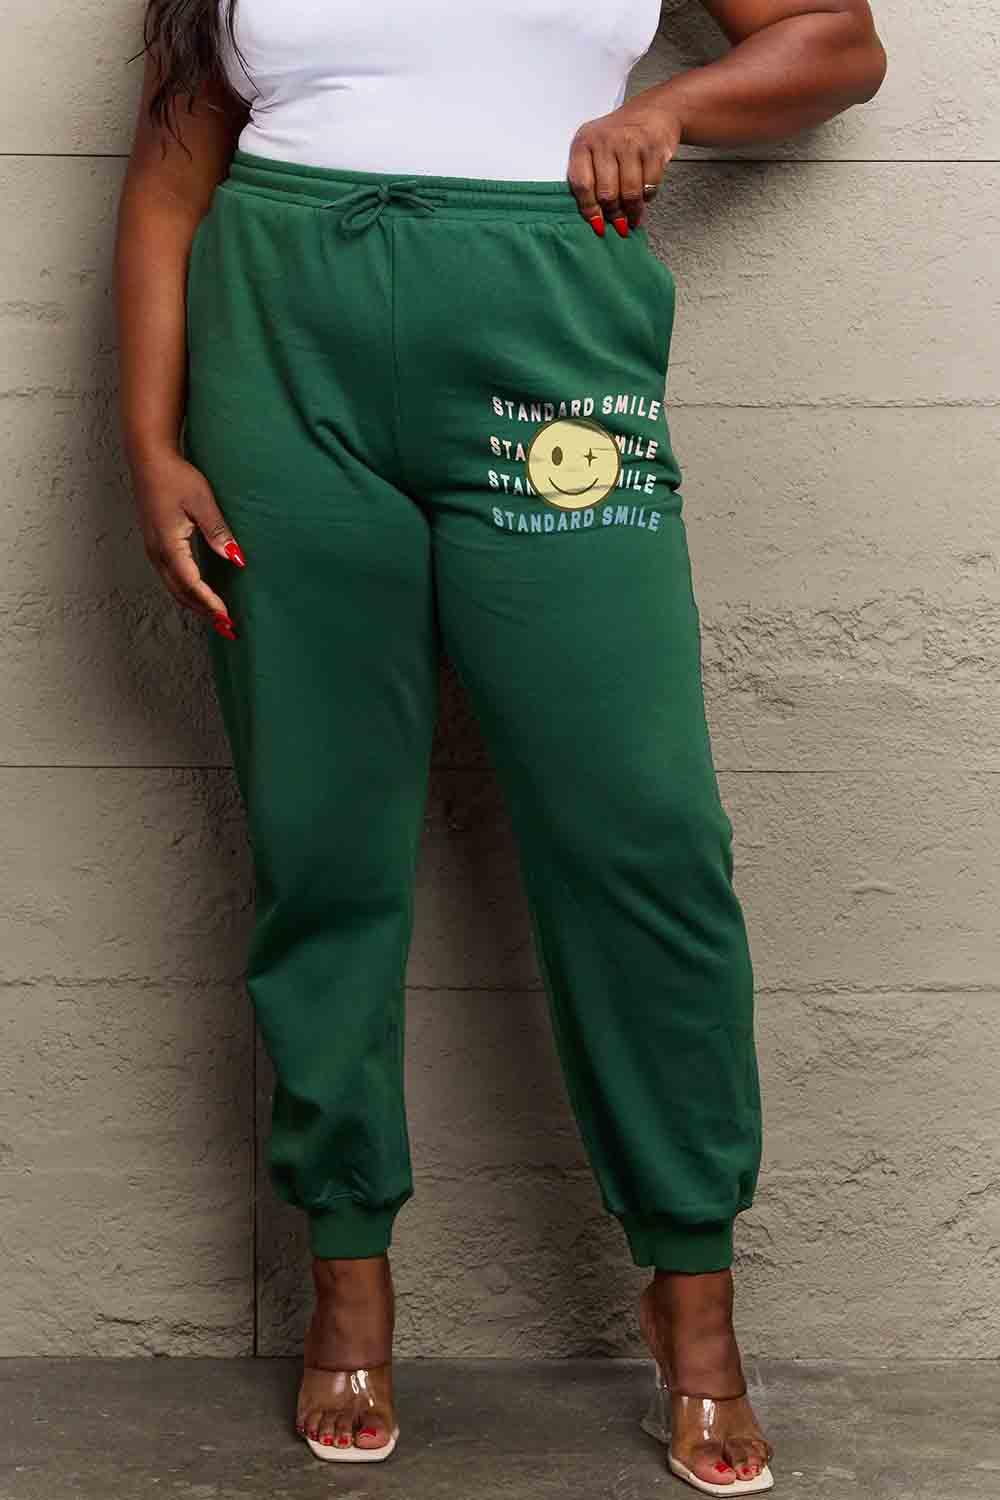 Simply Love Full Size STANDARD SMILES Graphic Sweatpants - Lab Fashion, Home & Health